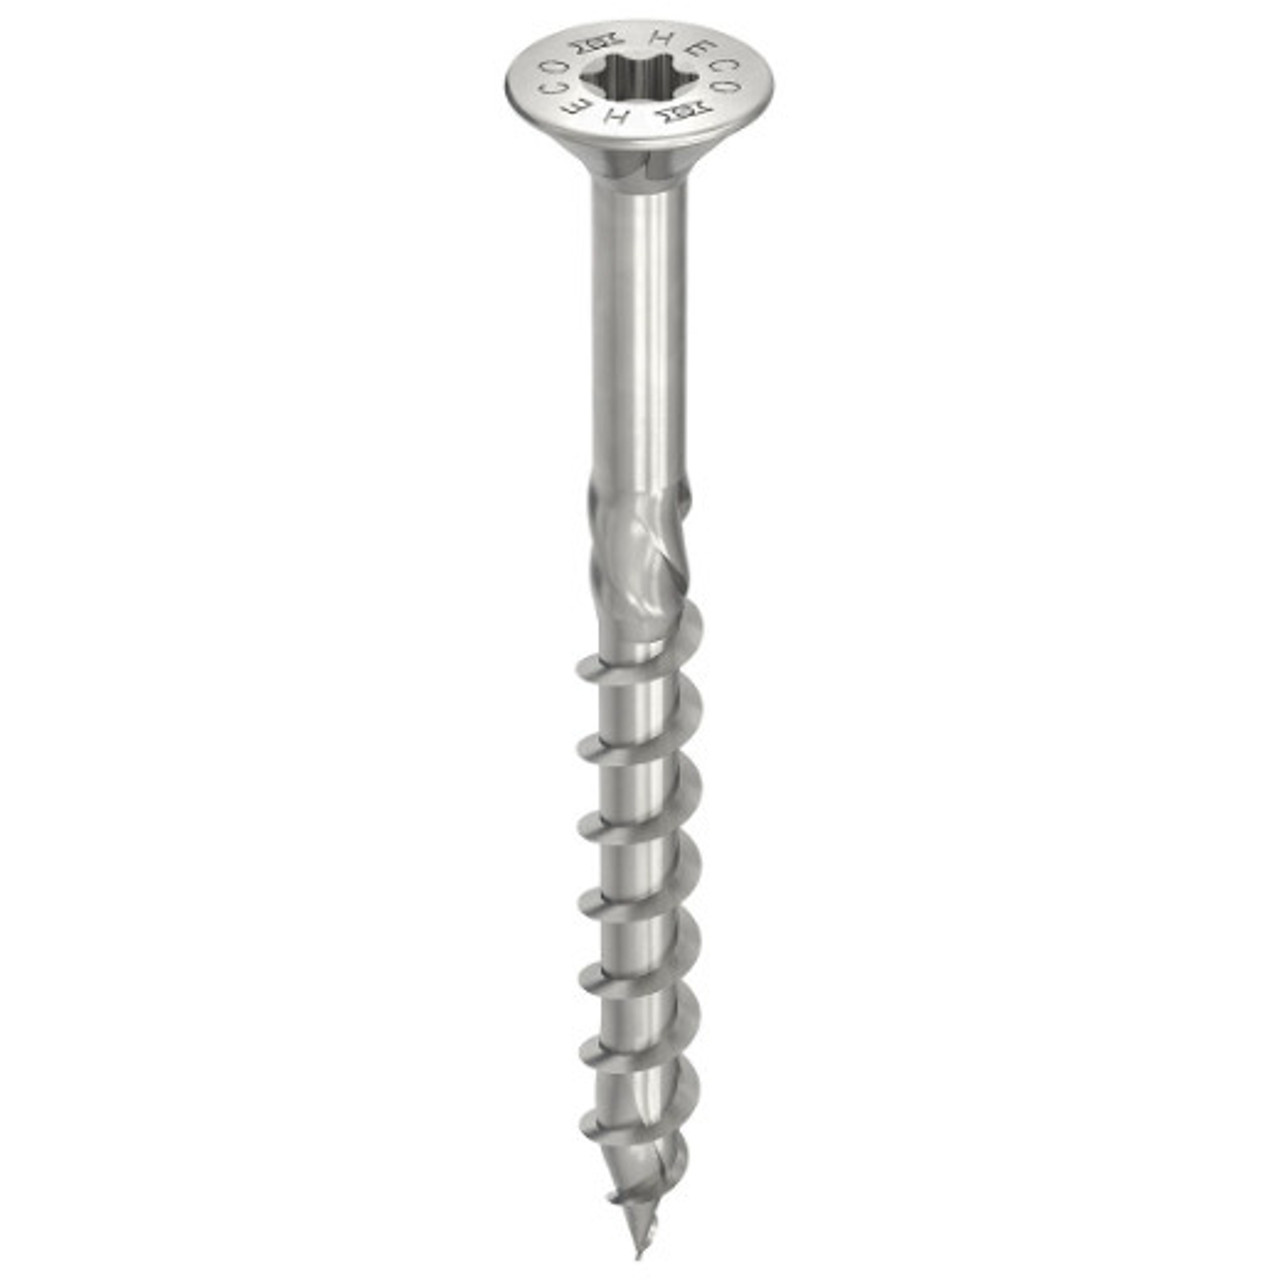 HECO Countersunk Head Screws | 8mm A2 304 Stainless Steel Full Thread with HD40 Drive, Timber Engineering, Outdoor Screws, Screws and Fasteners, Post and Beam Structures in Melbourne